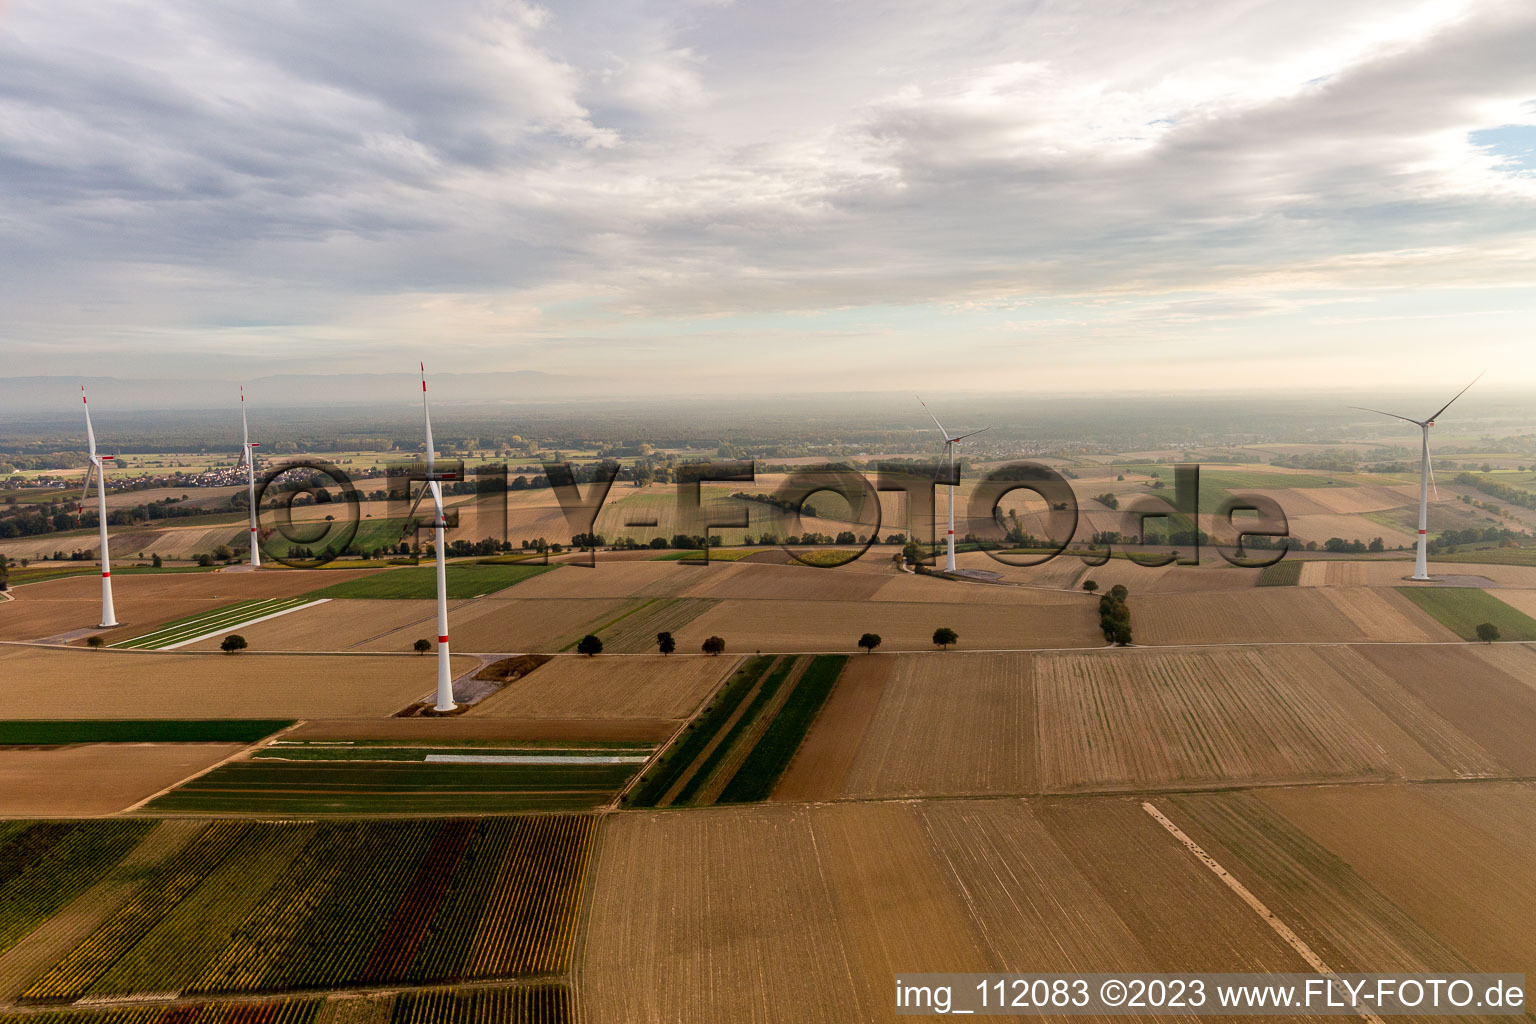 EnBW wind farm - wind turbine with 6 wind turbines in Freckenfeld in the state Rhineland-Palatinate, Germany seen from a drone